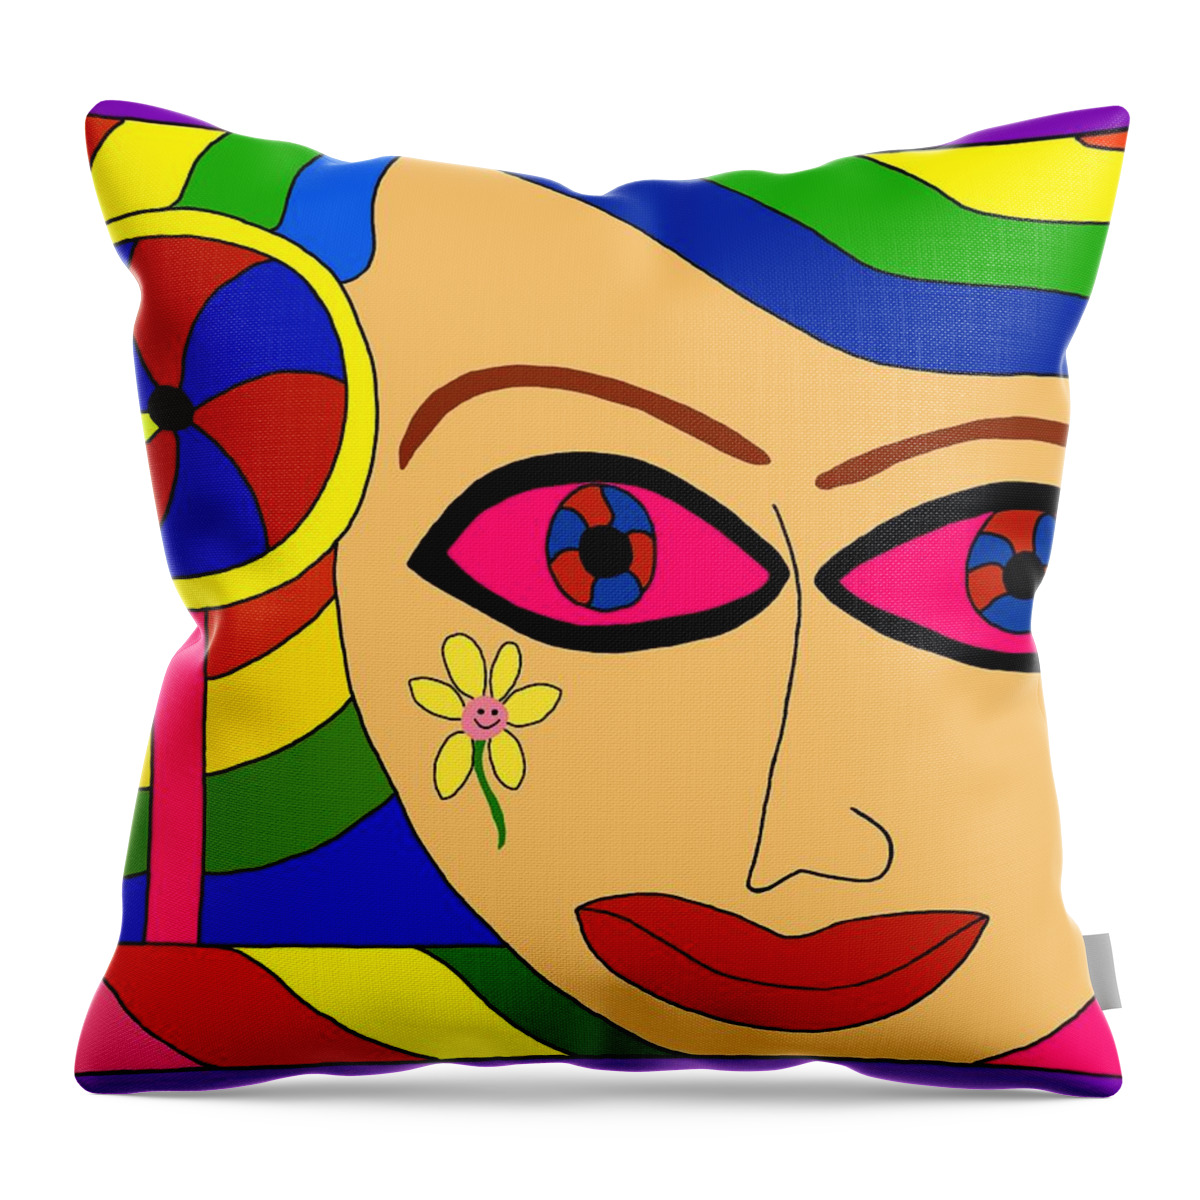 Psychedelic Art Throw Pillow featuring the digital art The Camera Eye by Laura Smith